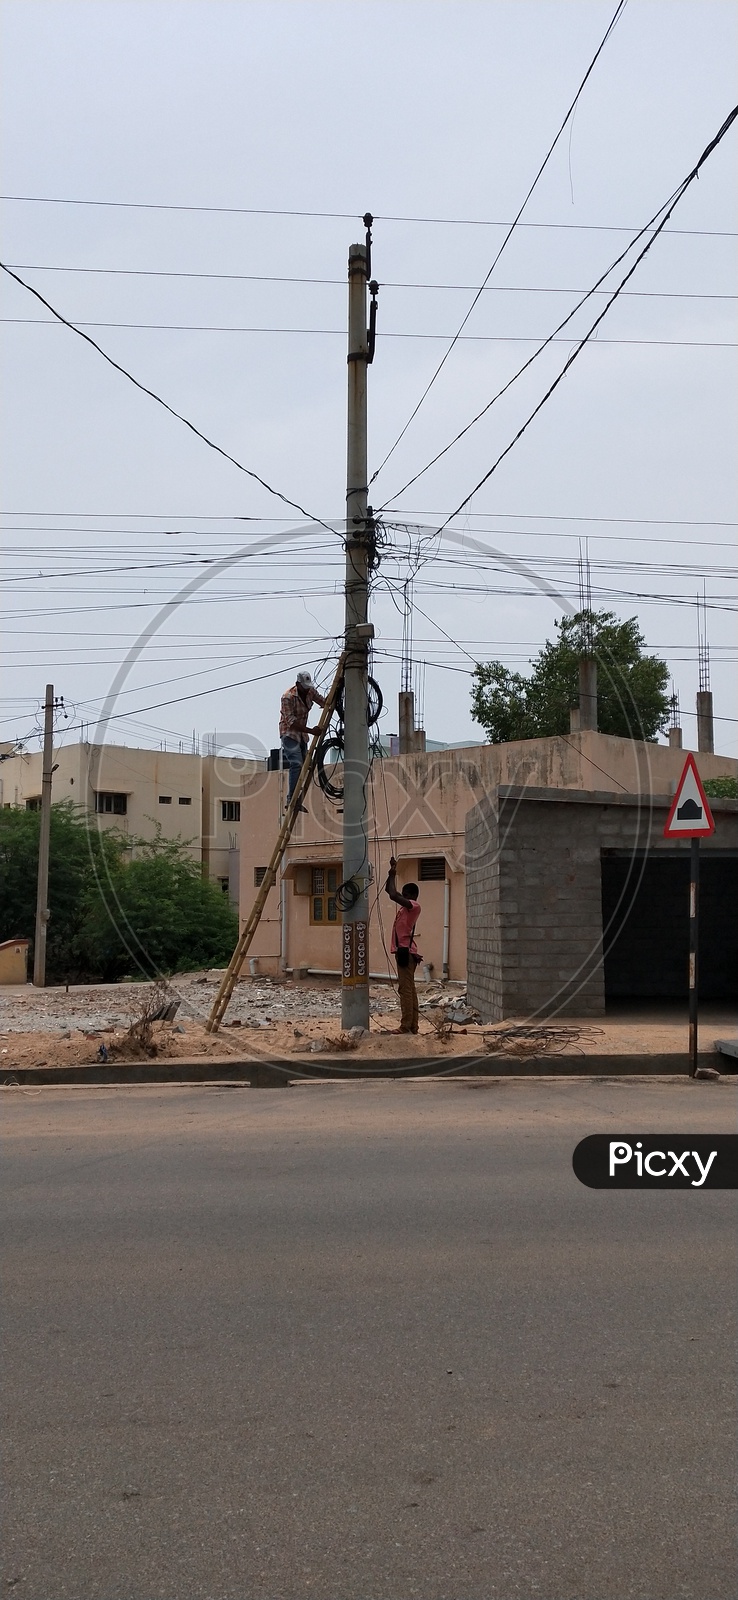 Two workers repairing the electric pole in afternoon